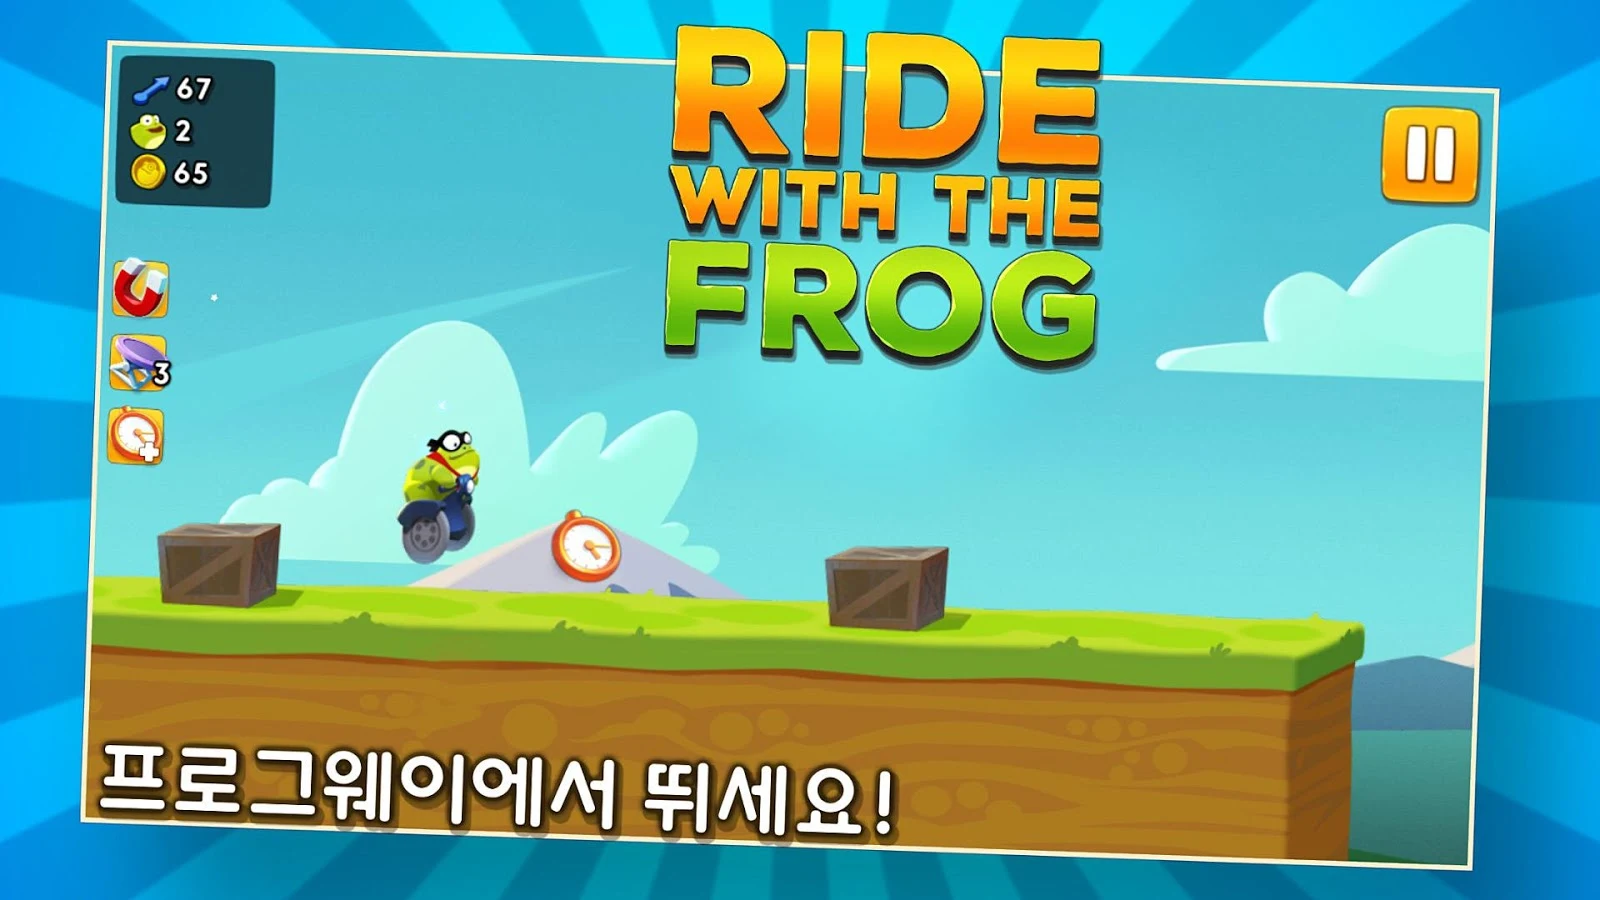   Ride with the Frog- 스크린샷 